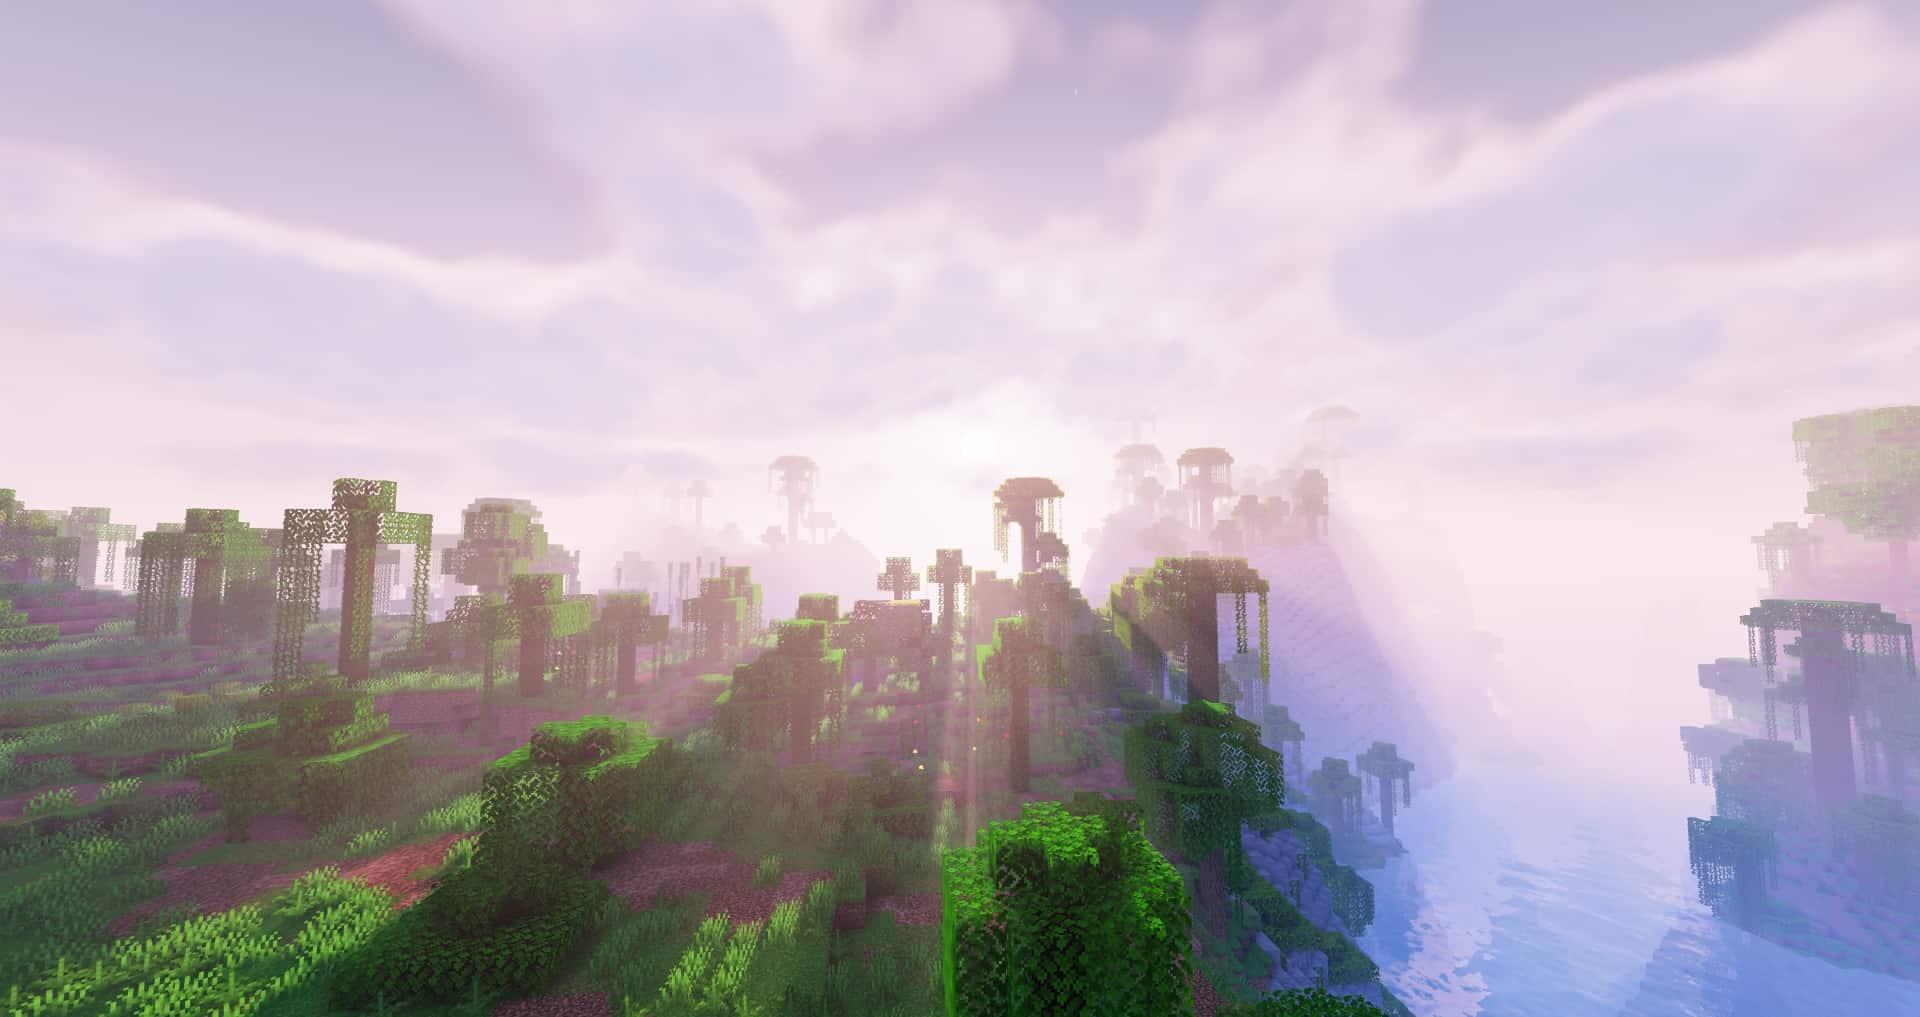 Shaders for Minecraft